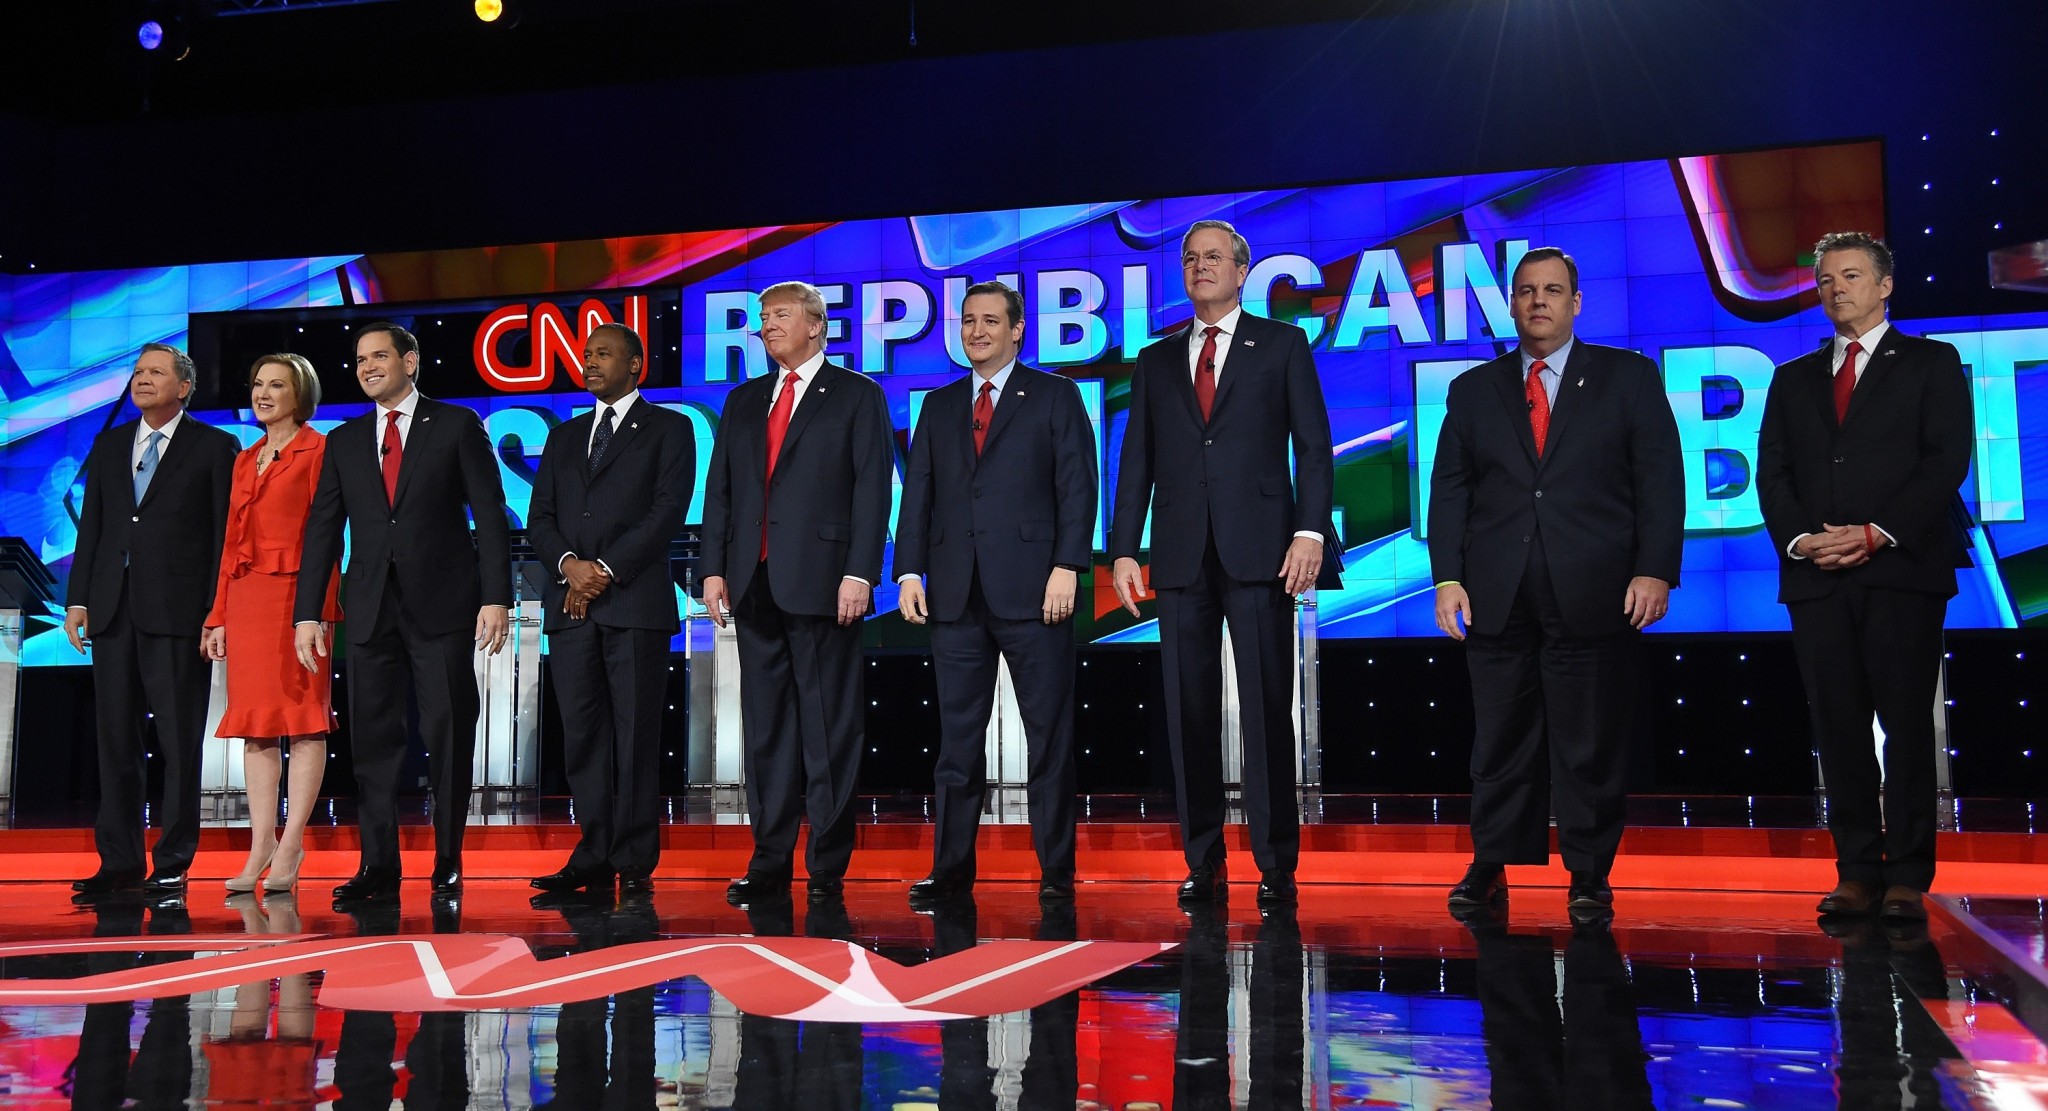 How to Watch the CNN Republican Debate on Roku, Fire TV, Chromecast, & Android TV